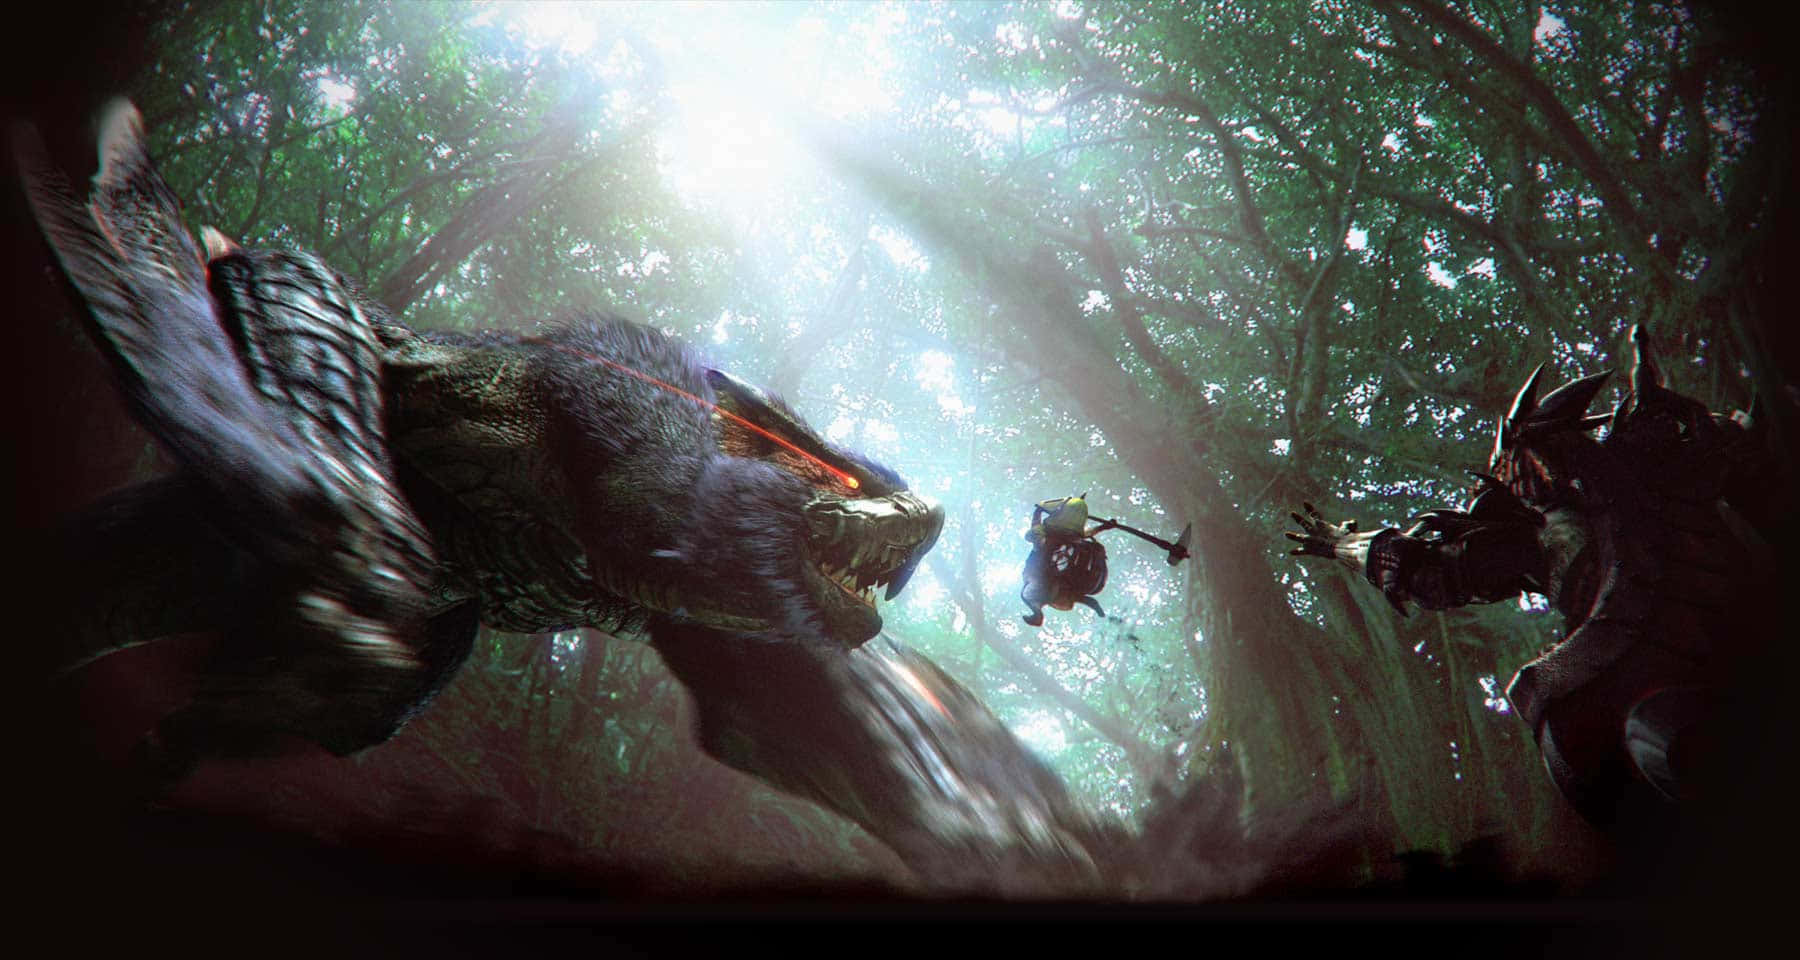 30+ Monster Hunter HD Wallpapers and Backgrounds